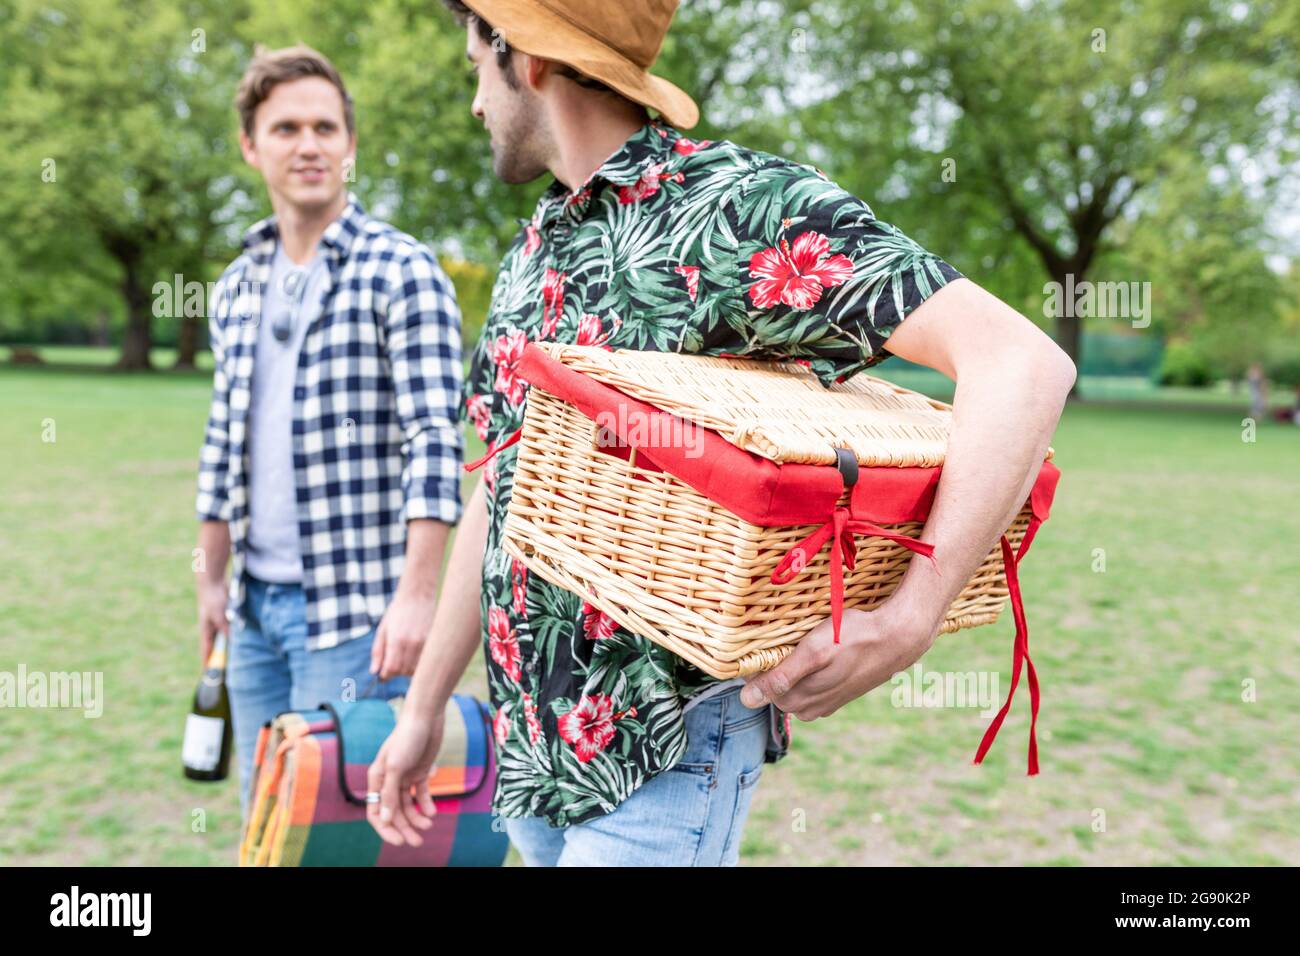 Man carrying basket while talking with friend at park Stock Photo